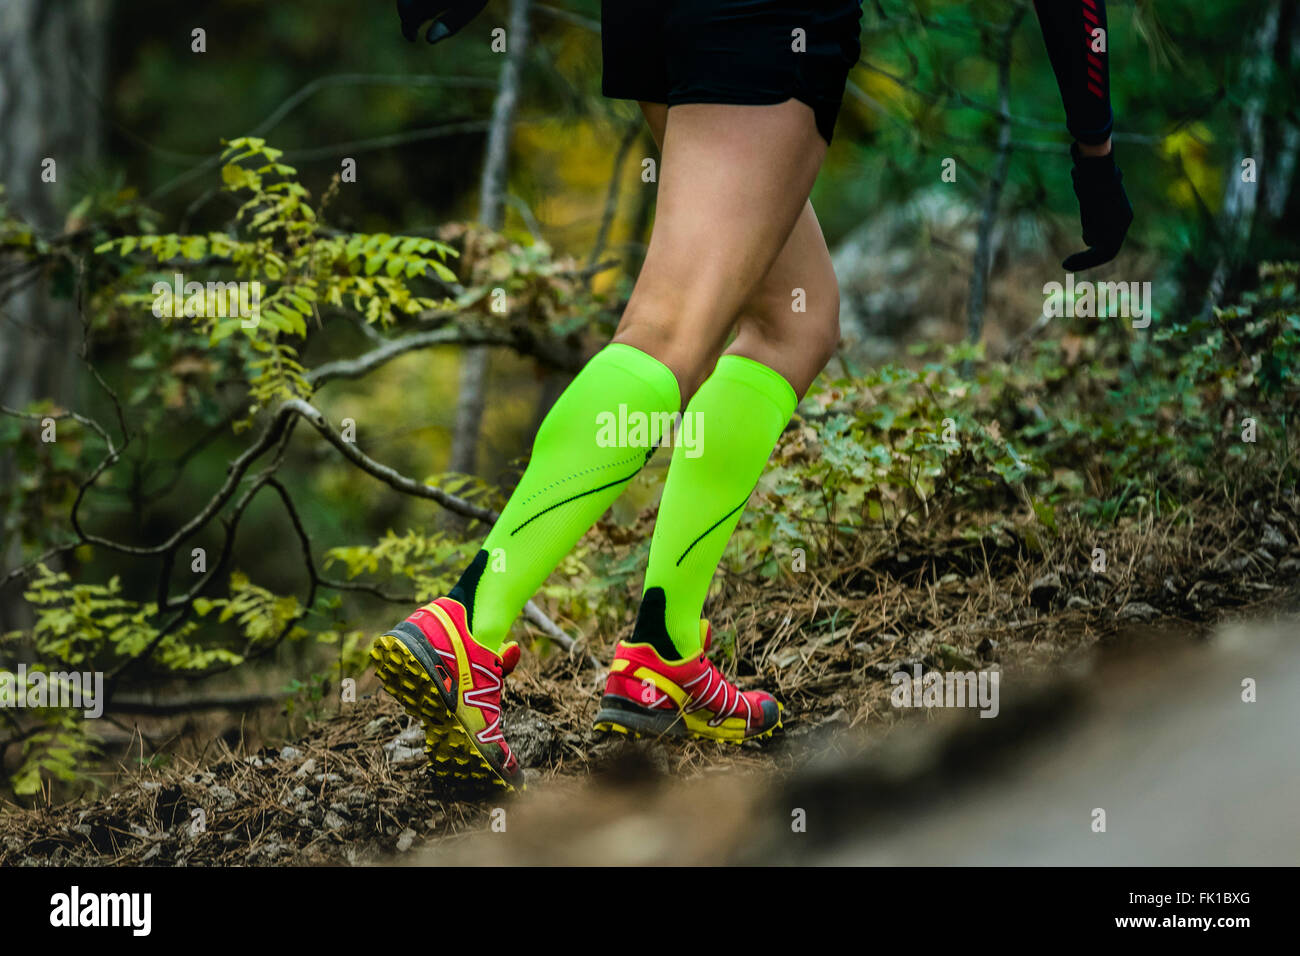 closeup slender and beautiful legs of woman running  in compression socks. fitness and exercise in forest Stock Photo